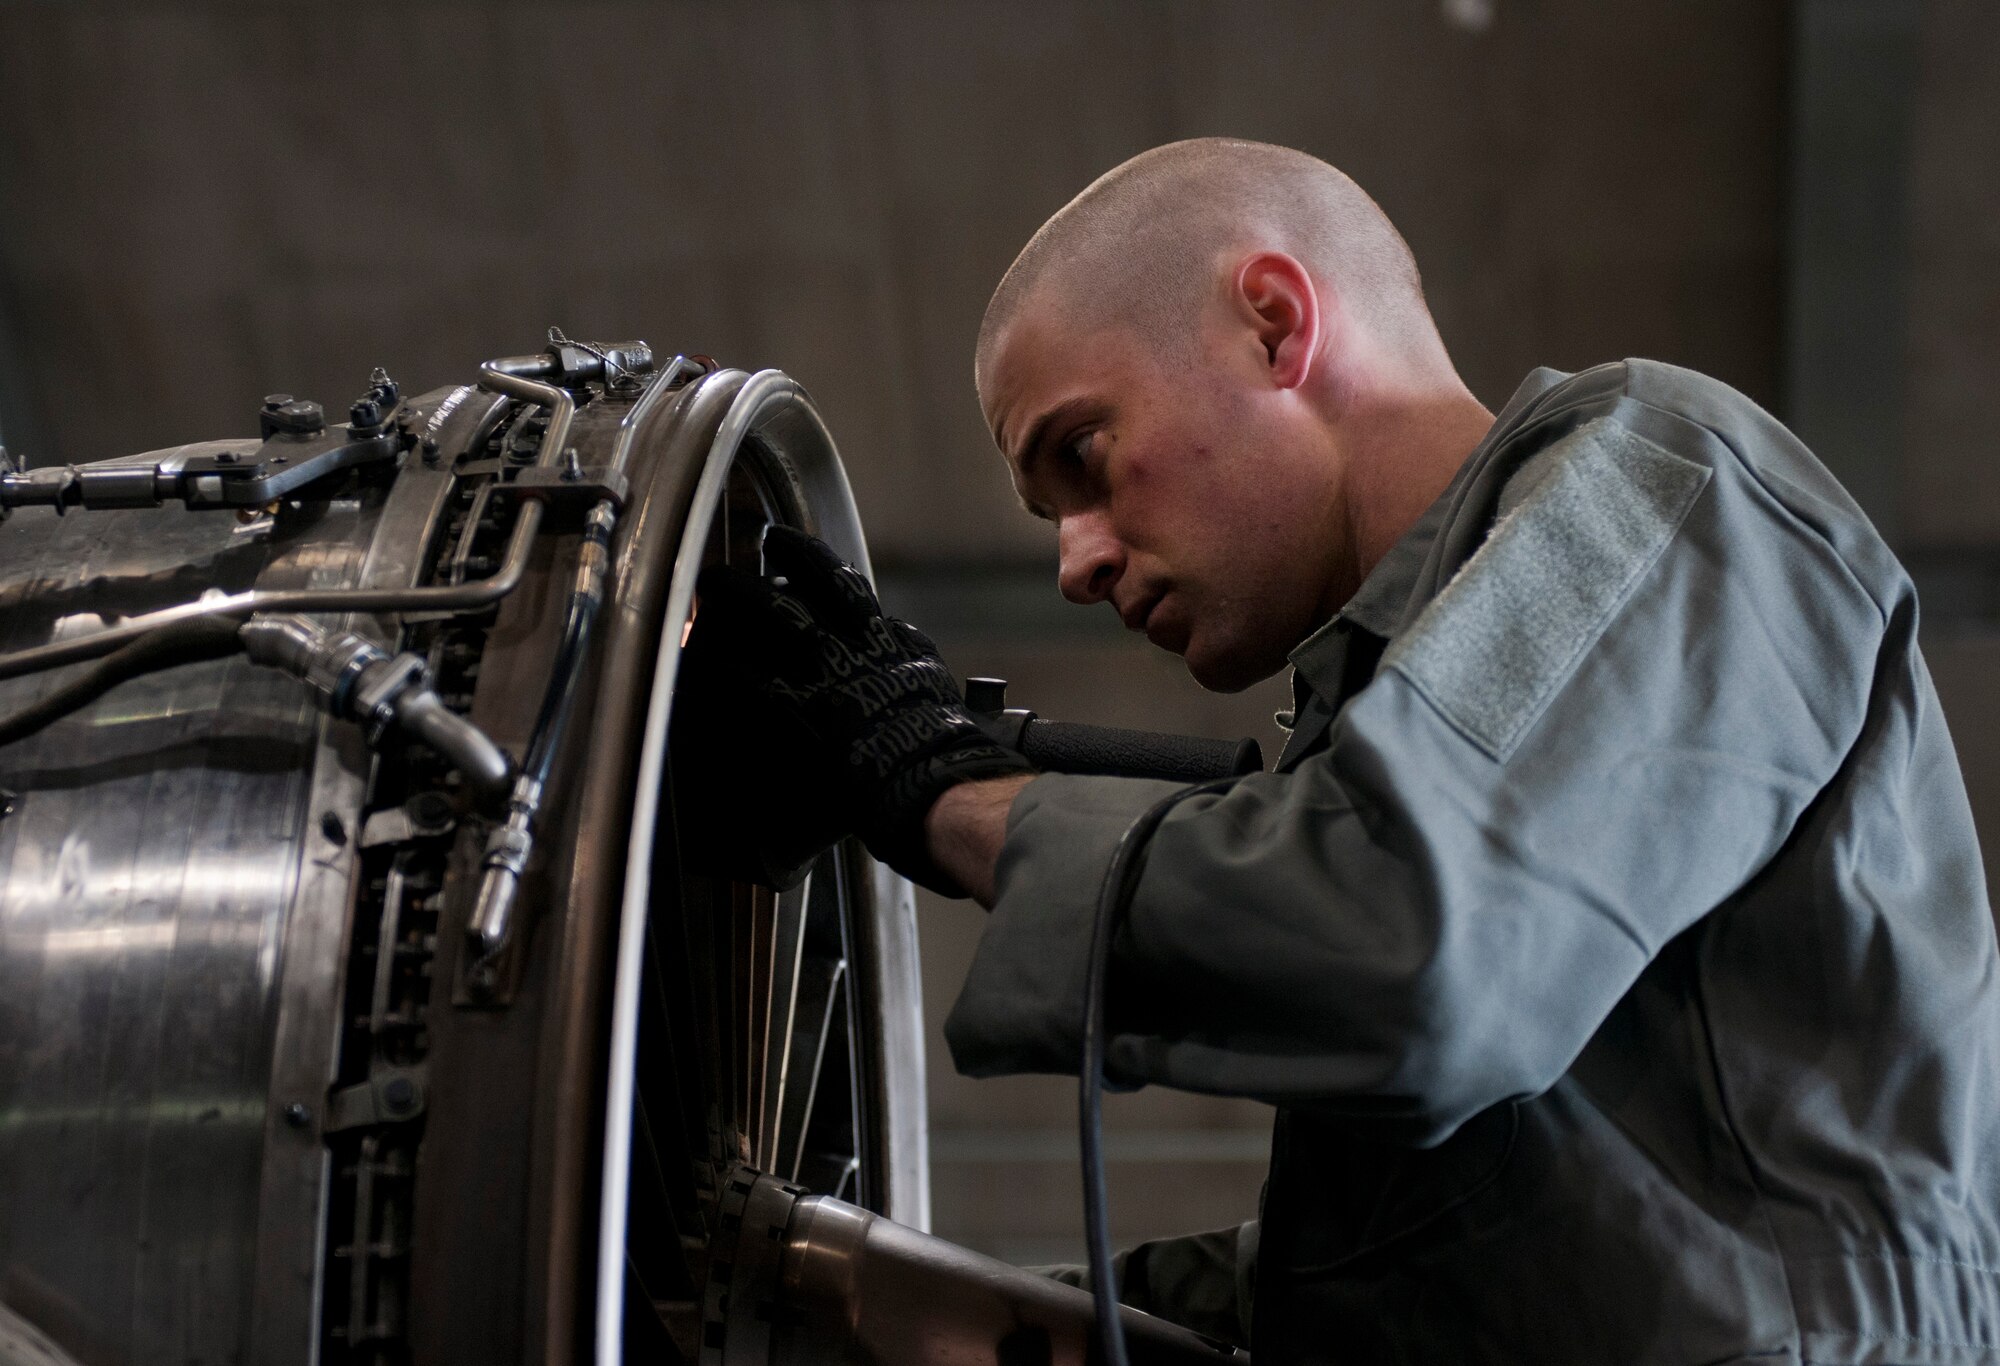 U.S. Air Force Staff Sgt. James Root, 366th Component Maintenance Squadron aerospace propulsion journeyman, looks at engine blades, May 5, 2013, at Mountain Home Air Force Base, Idaho. The blades must be checked prior to an engine test run and again when the run is complete. (U.S. Air Force photo by Senior Airman Heather Hayward/Released)